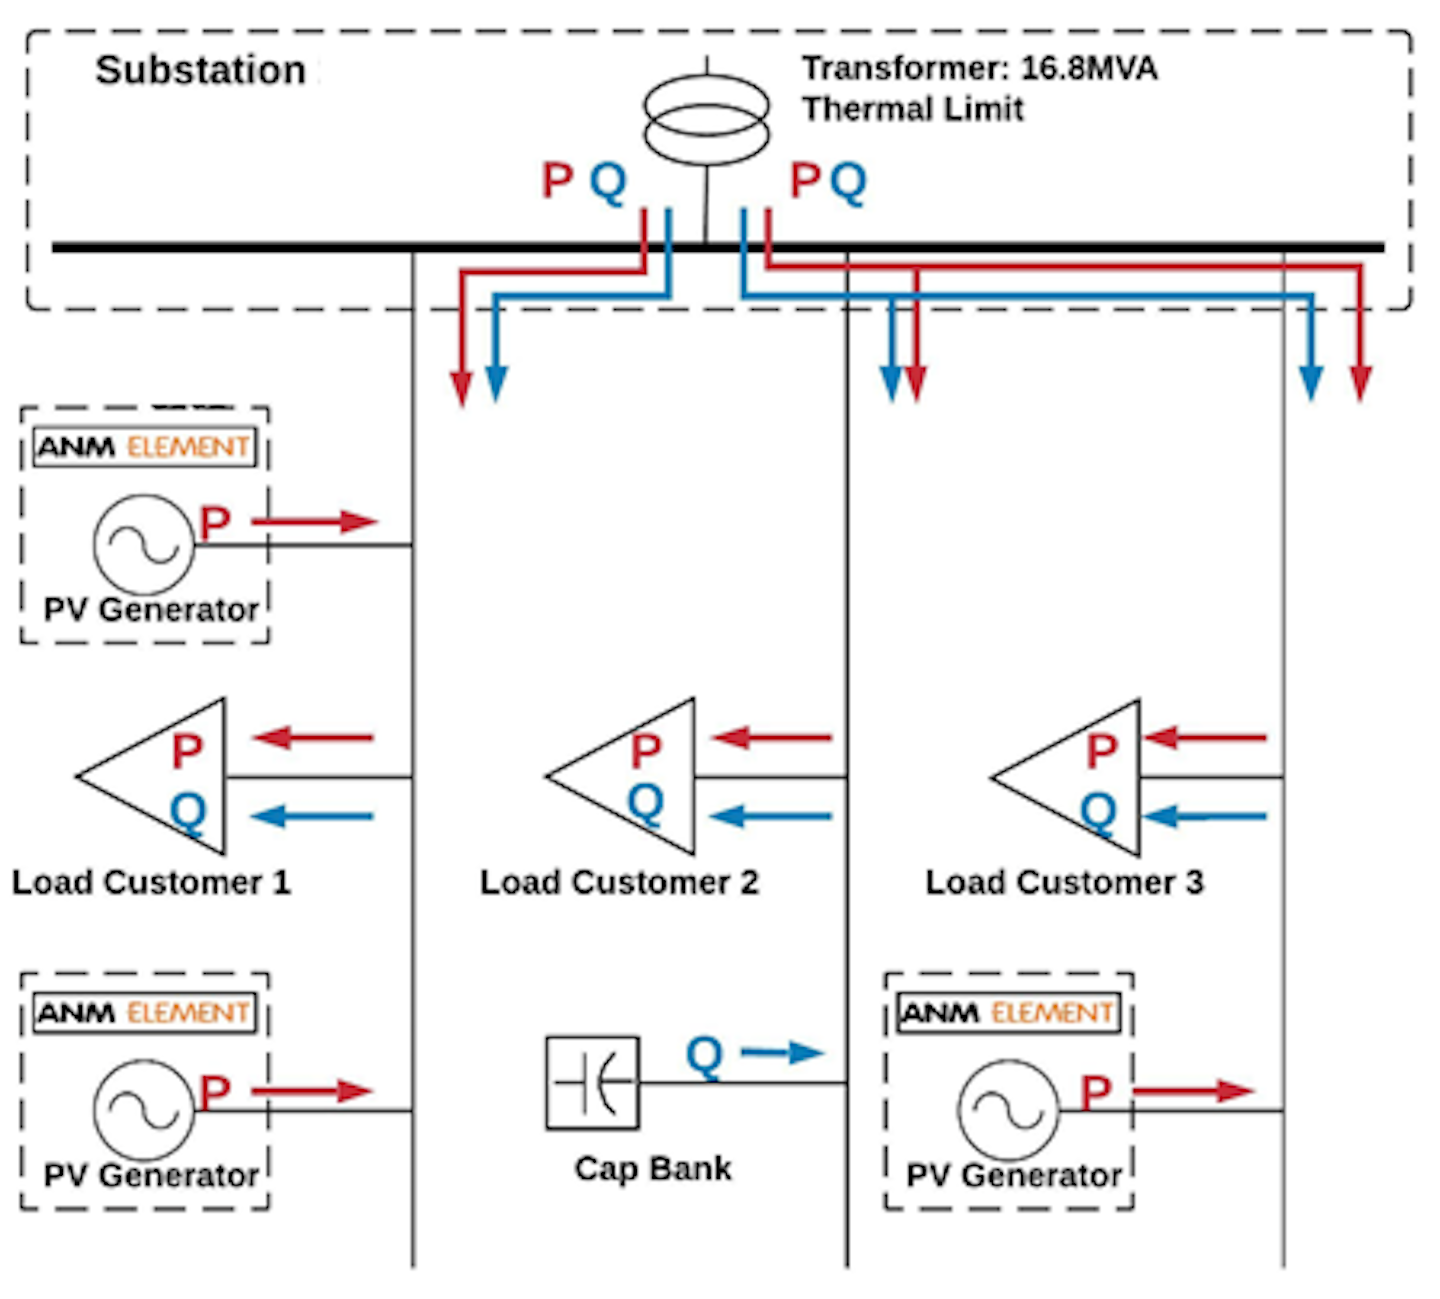 Conventional means of voltage support rely on reactive power (blue lines) supplied from the substation or traditional capacitors banks to supply local loads.